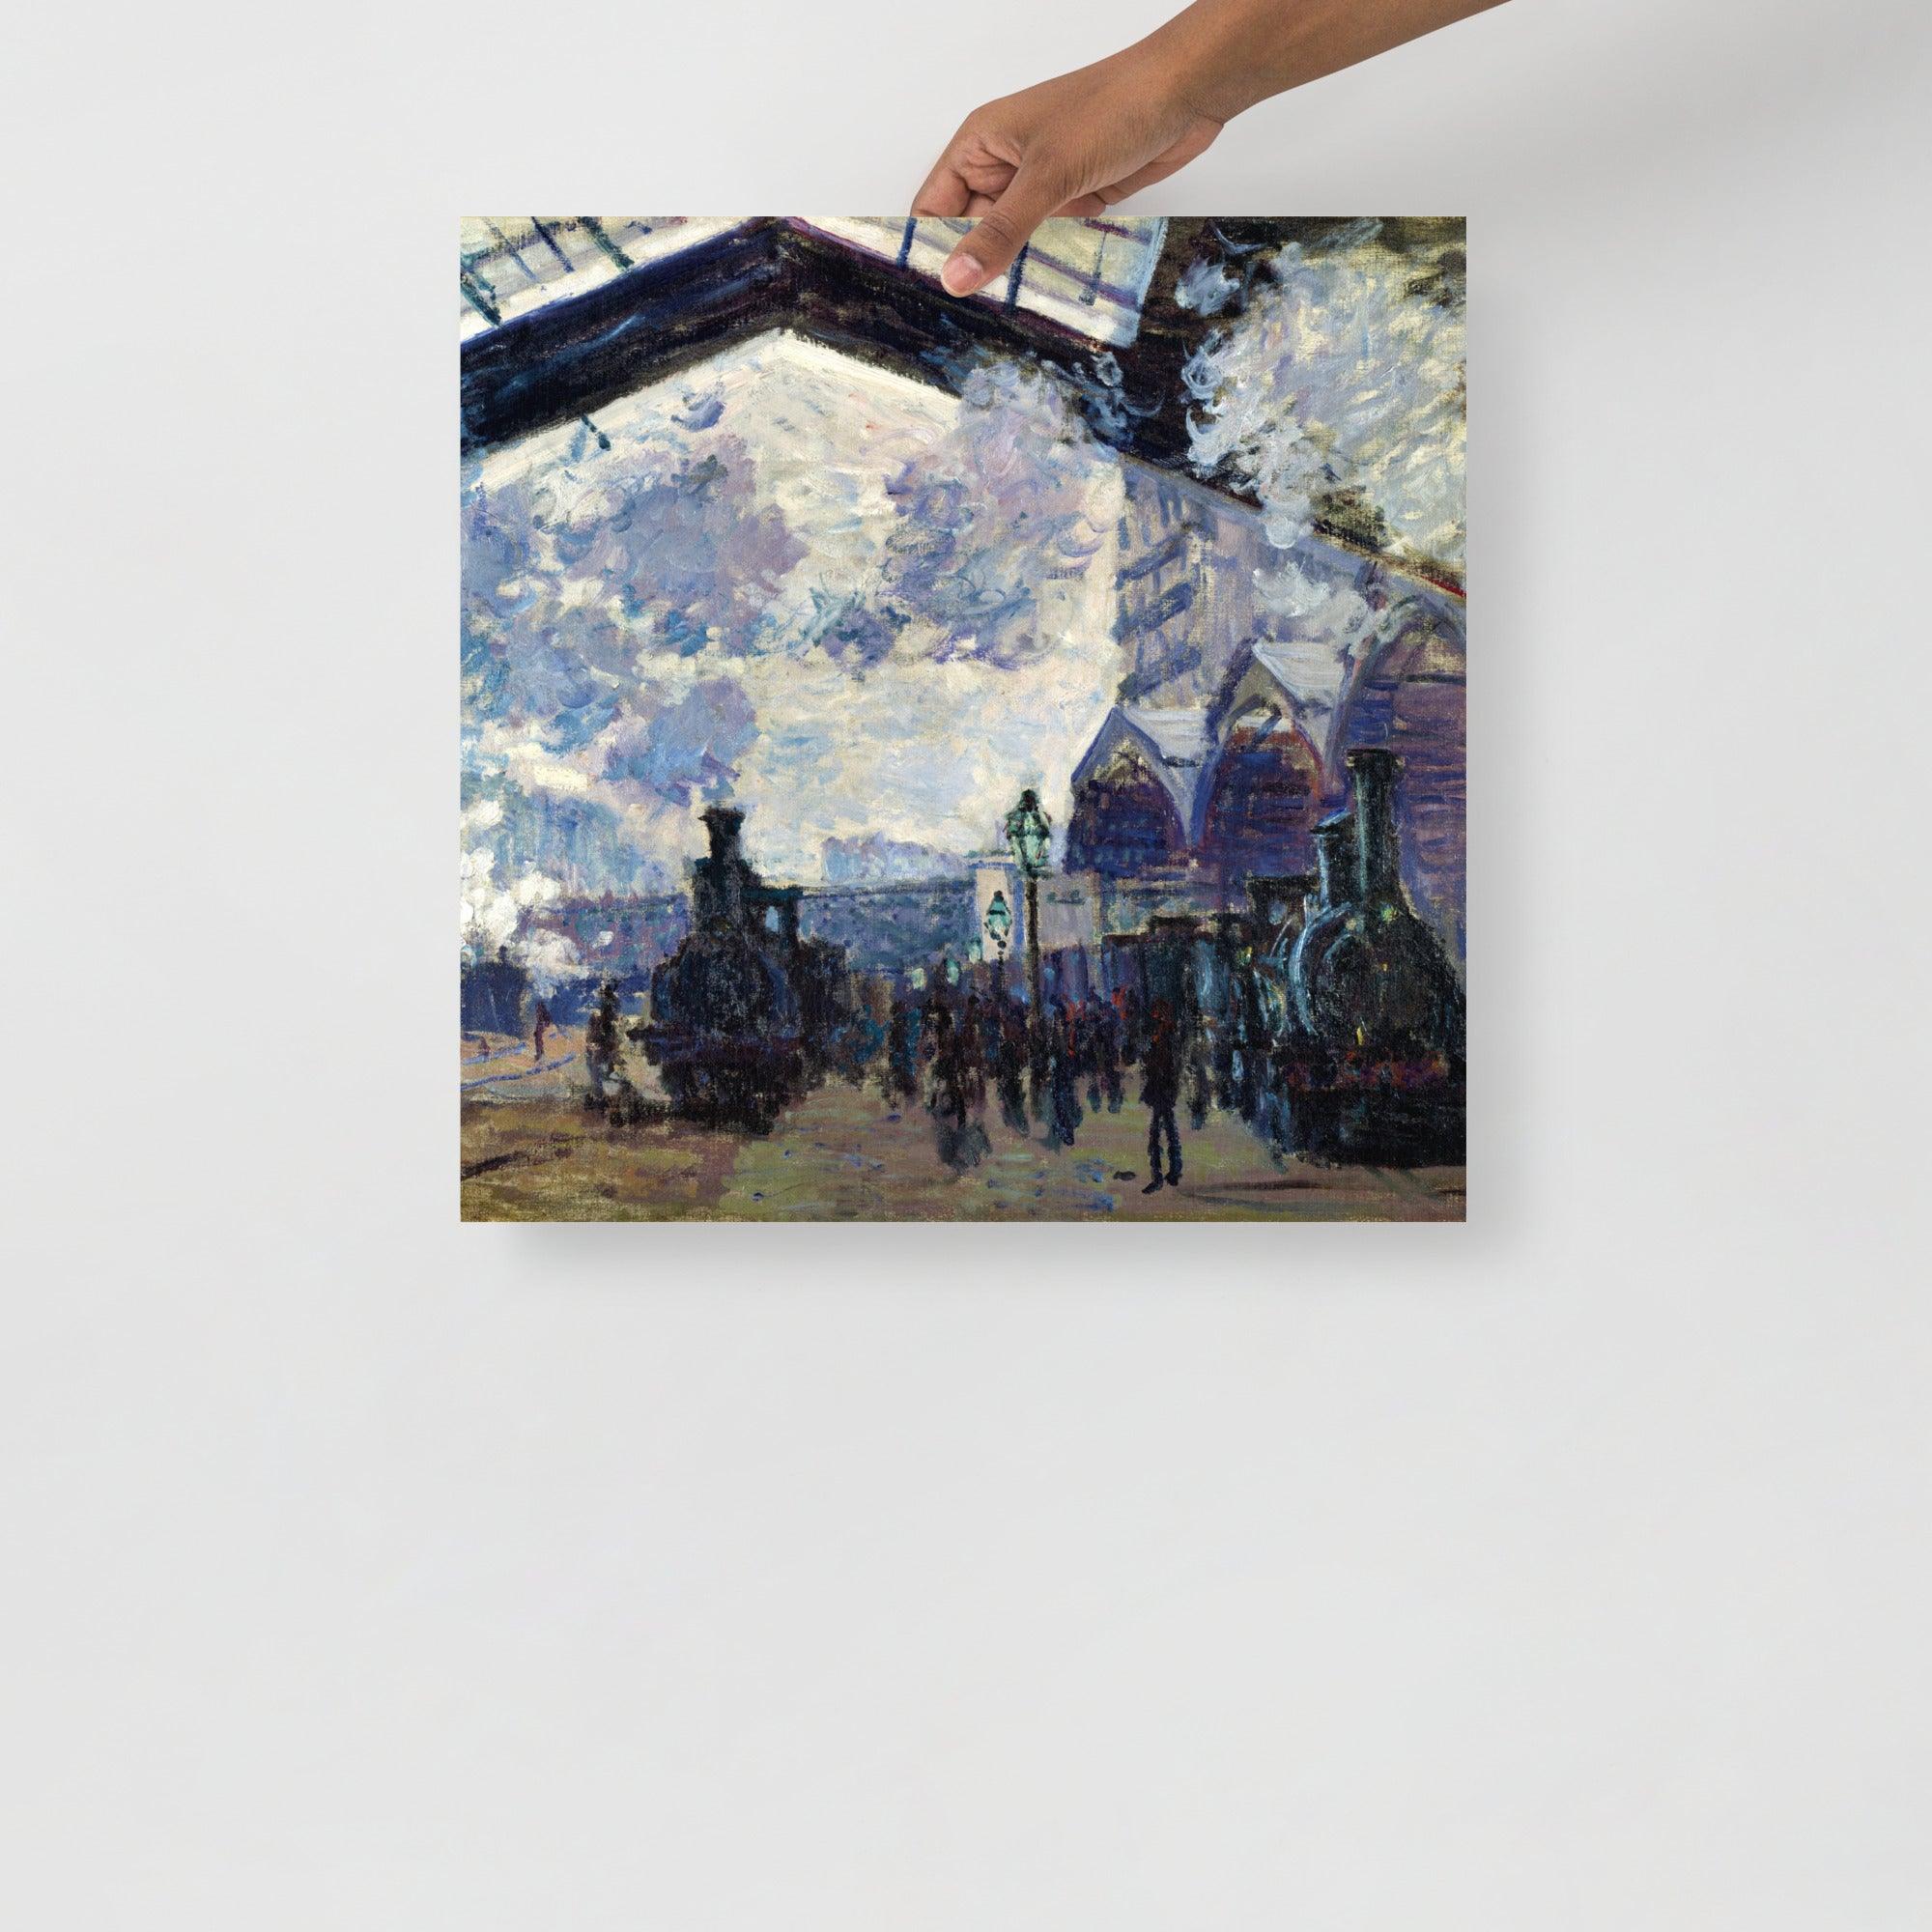 The Gare St-Lazare by Claude Monet  poster on a plain backdrop in size 18x18”.